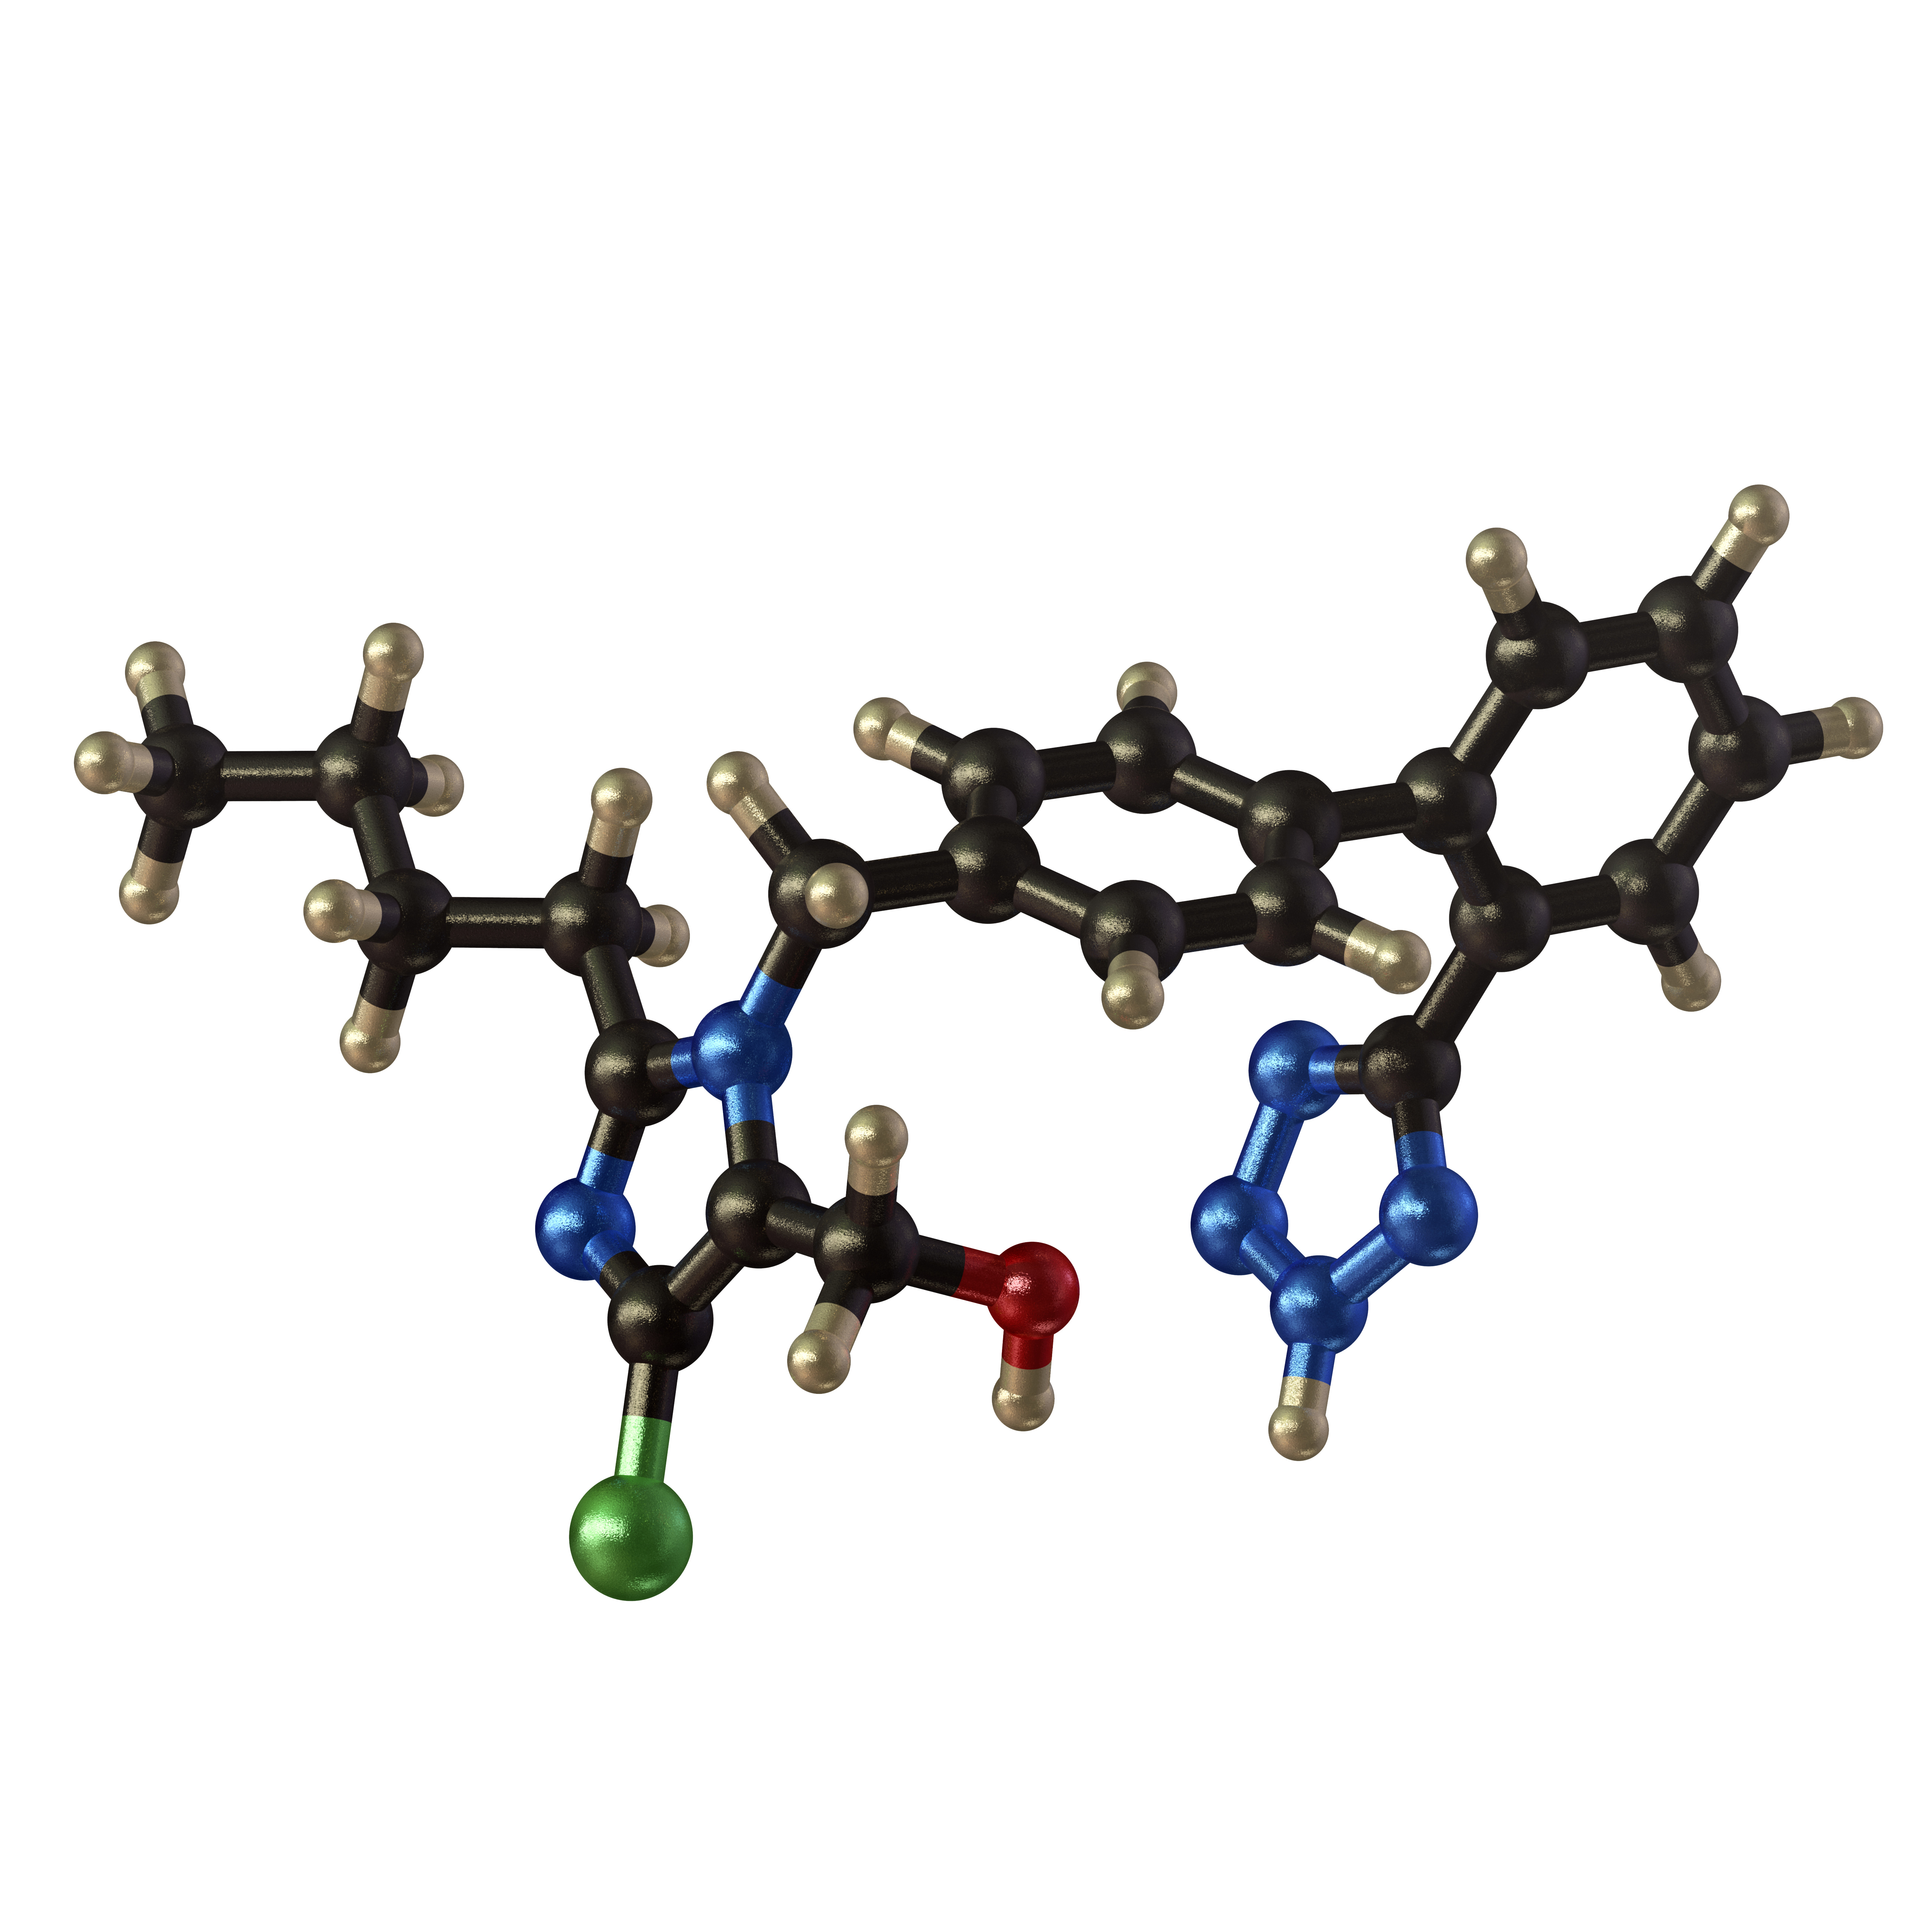 A molecular model of the ARB drug Losartan shows mostly black atoms connected to each other.